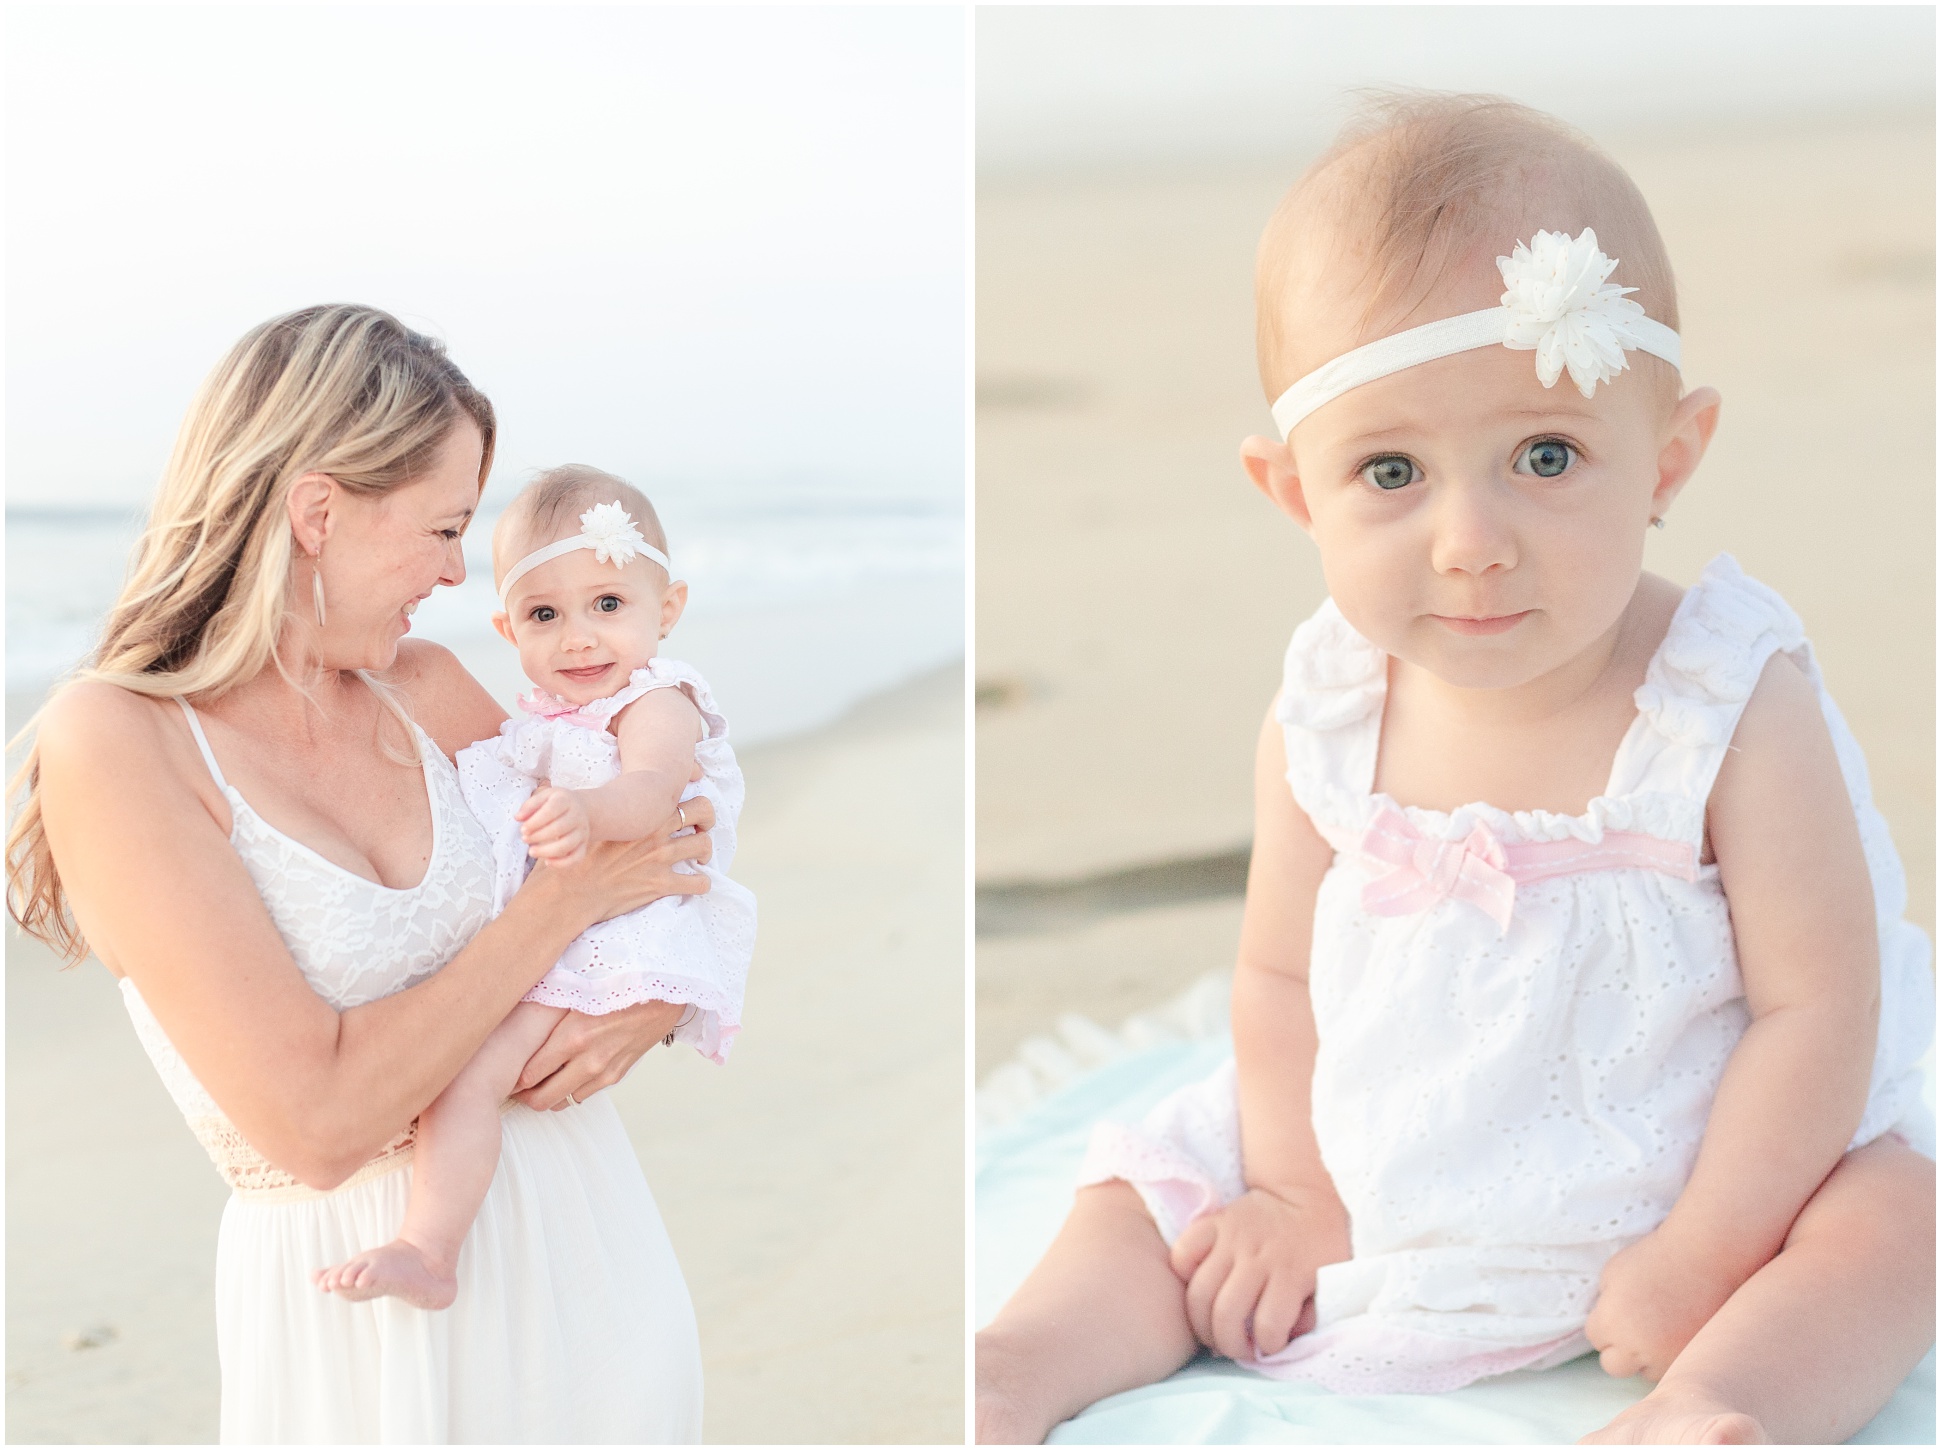 Two images of a beach mommy and me session